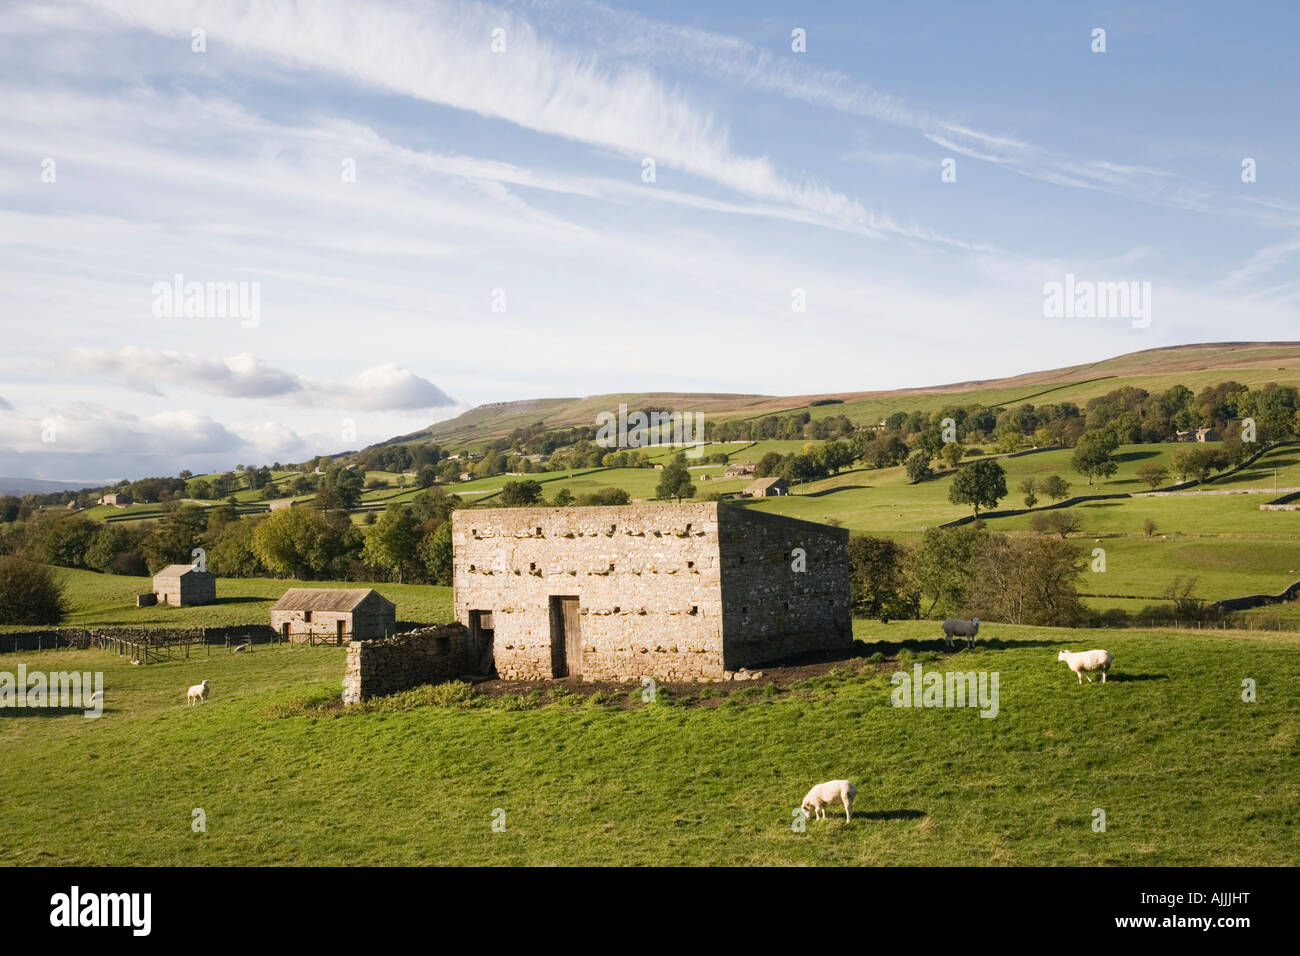 Typical rural farmland landscape across Wensleydale valley in Yorkshire Dales National Park North Yorkshire England UK Britain Stock Photo